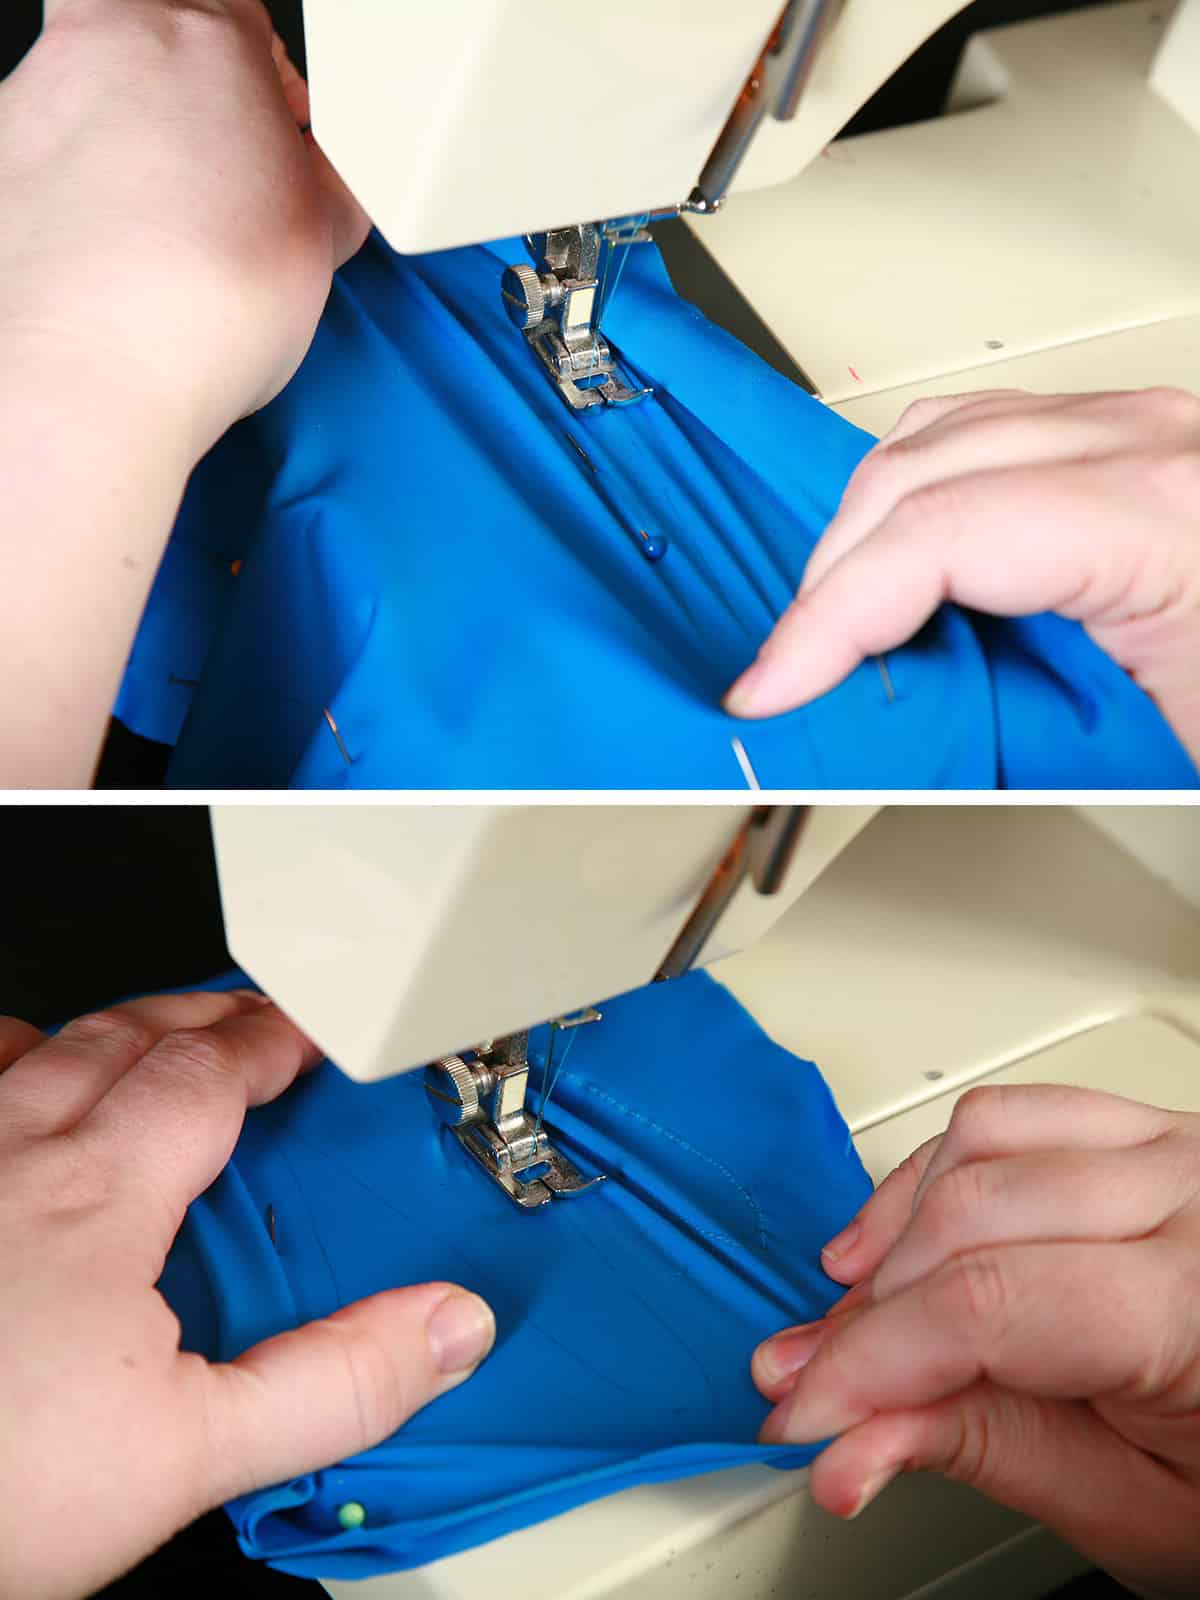 A two part compilation image showing blue spandex fabric being sewn in a sewing machine.